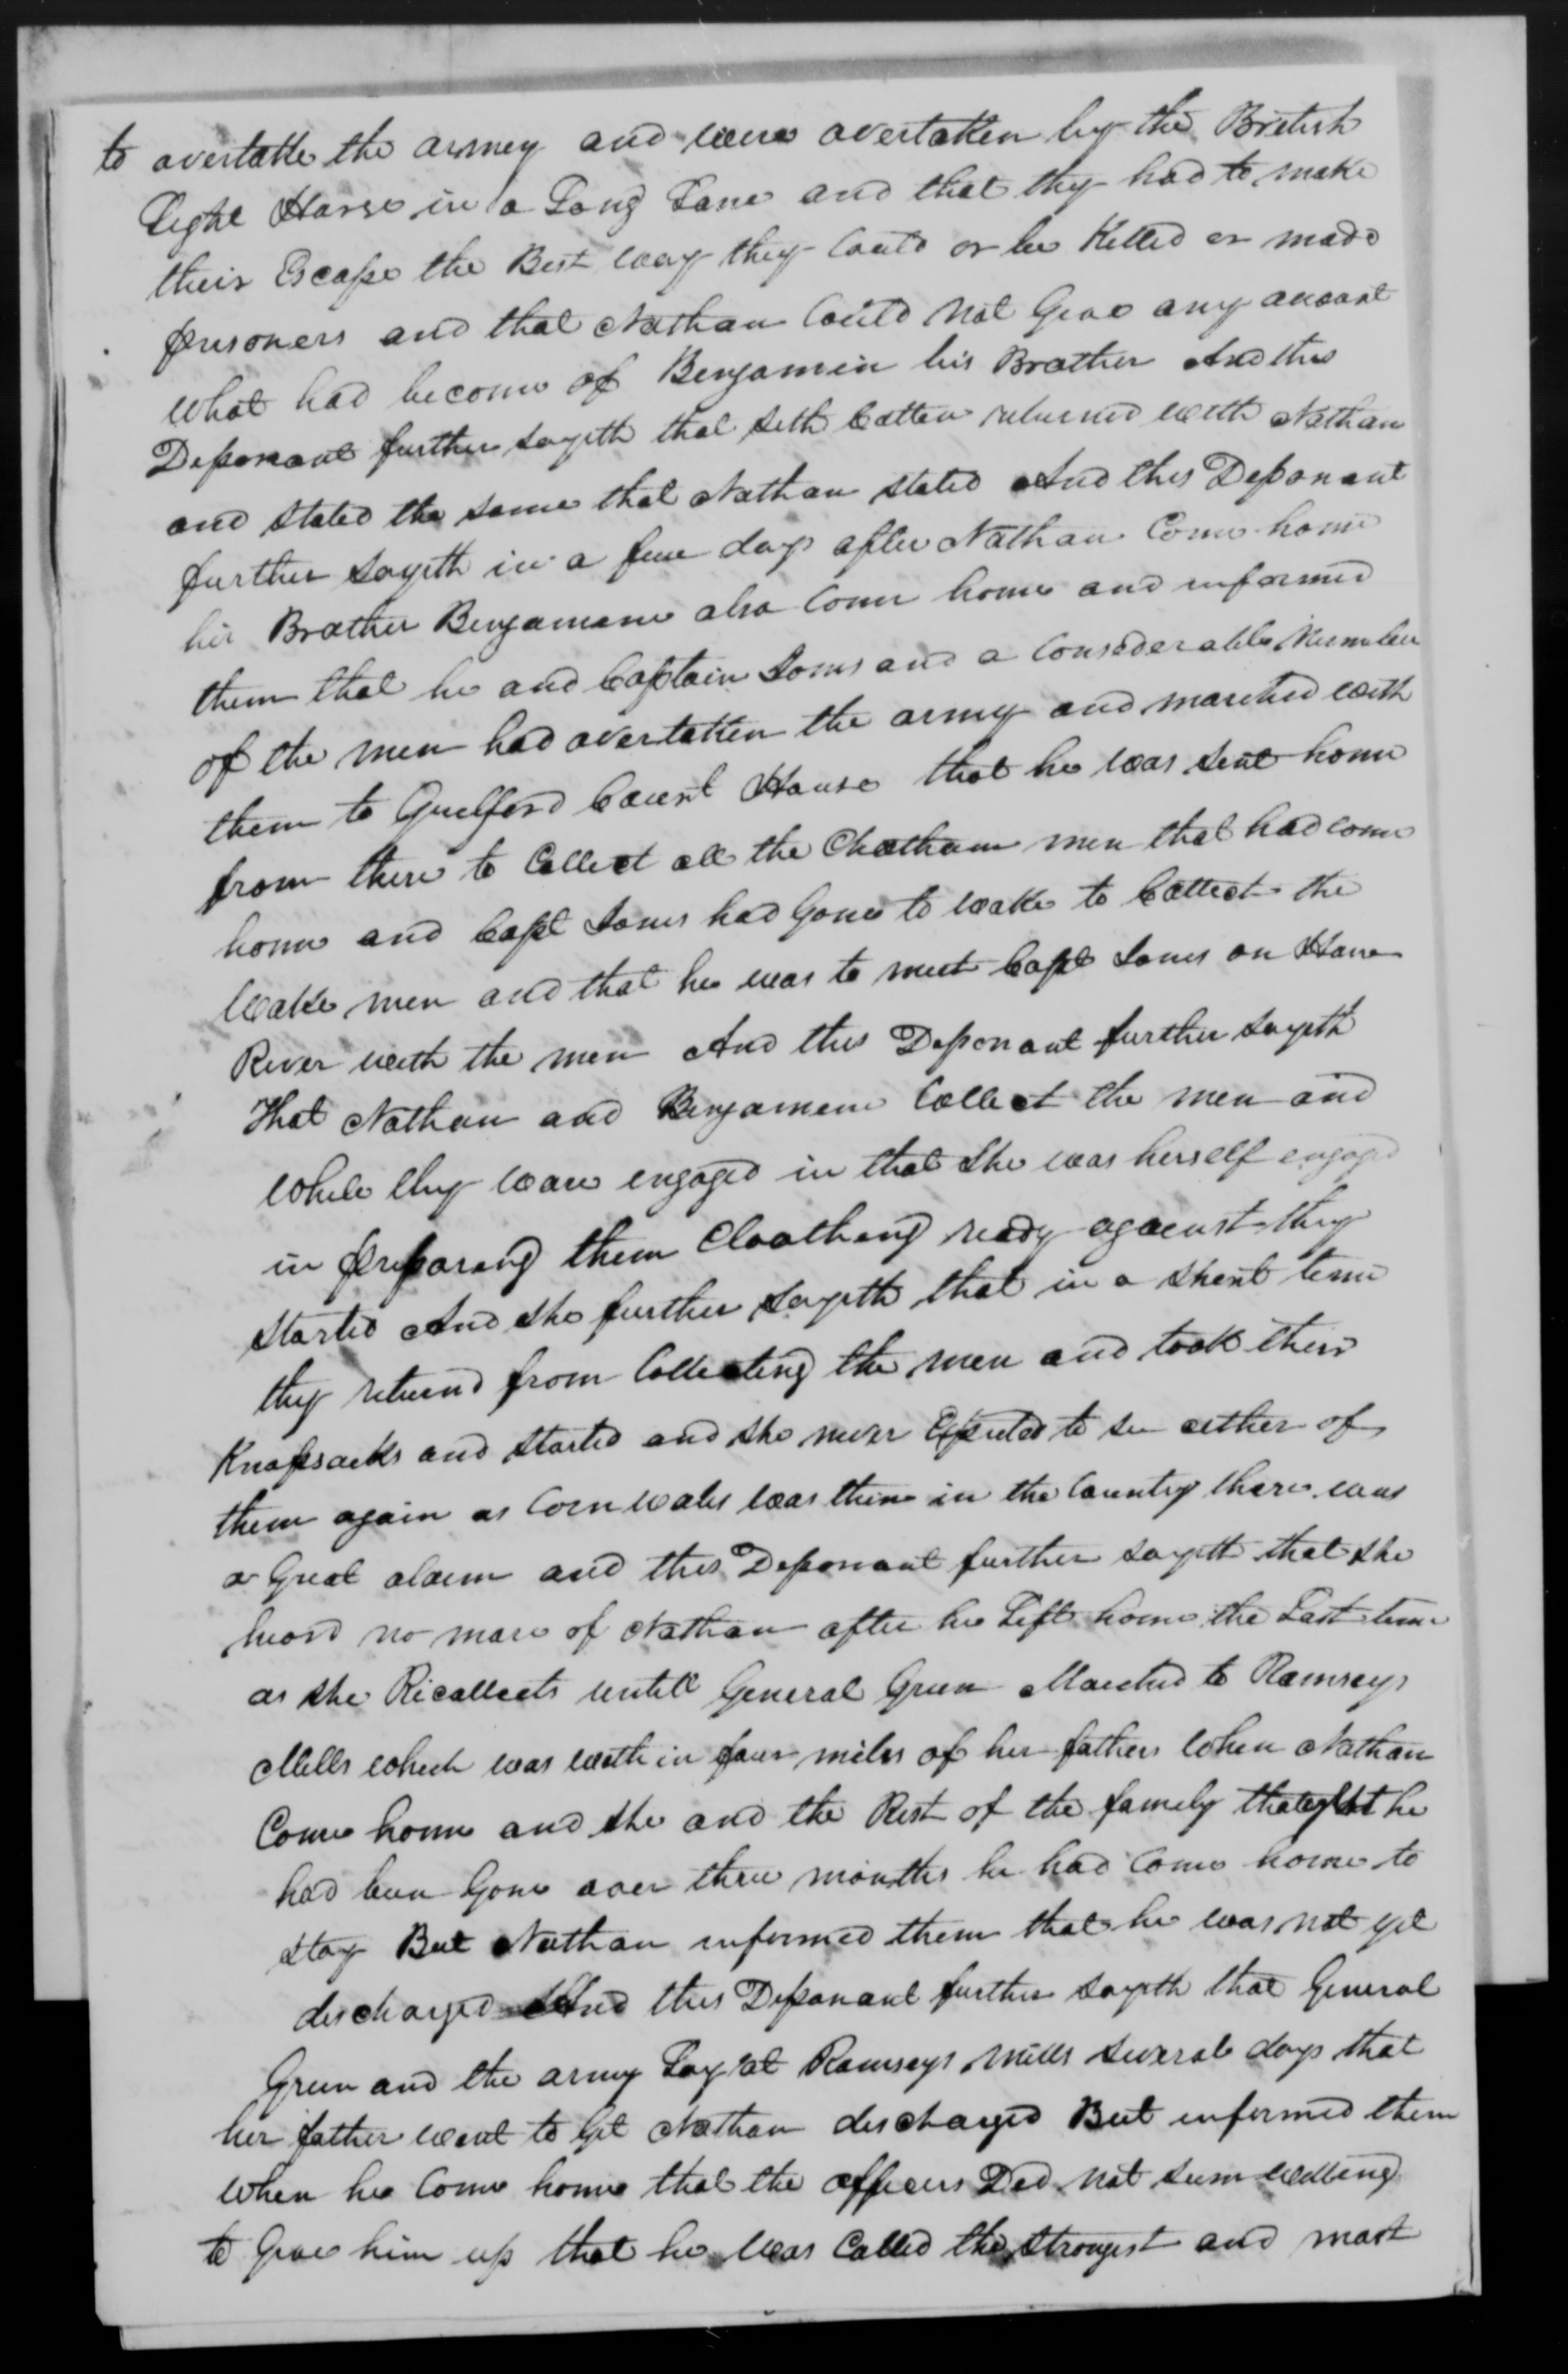 Affidavit of Milly Yarborough in support of a Pension Claim for Nathan Yarborough, 5 August 1833, page 2